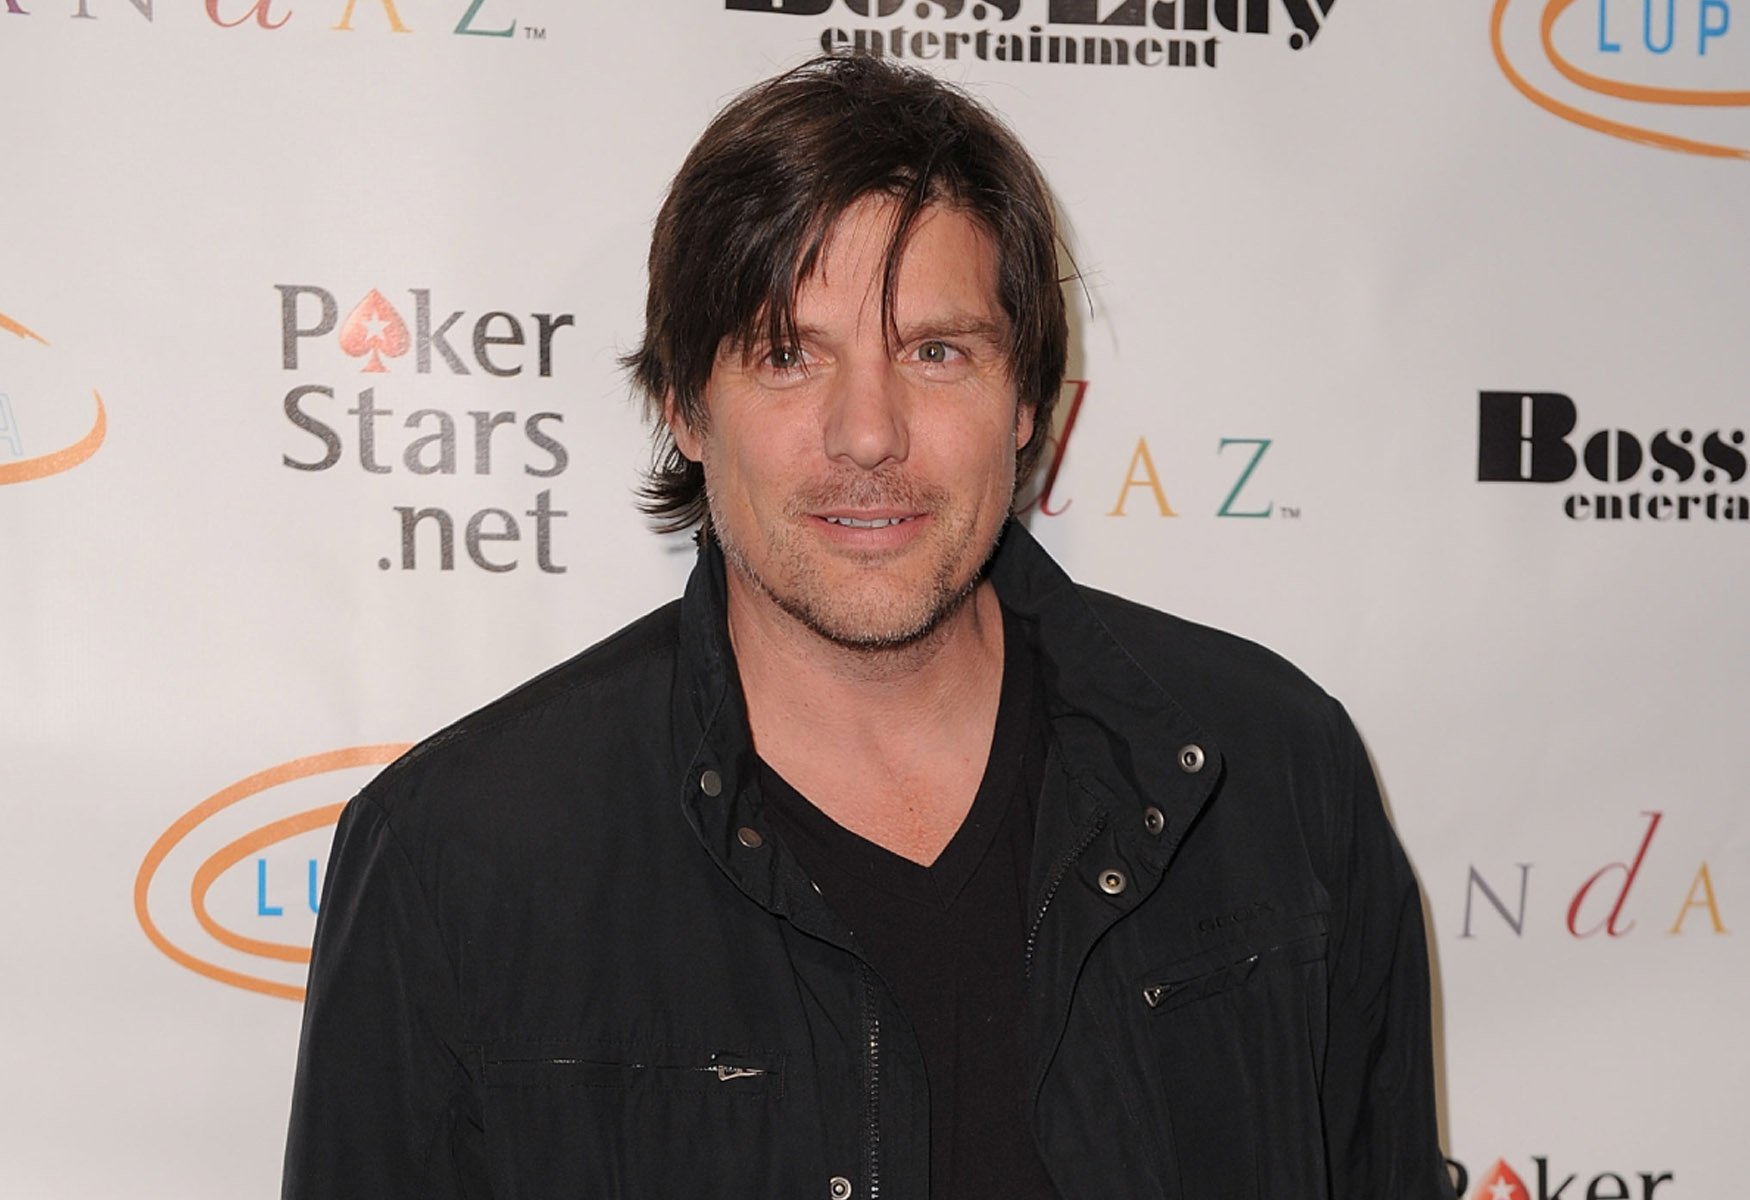 13-intriguing-facts-about-paul-johansson